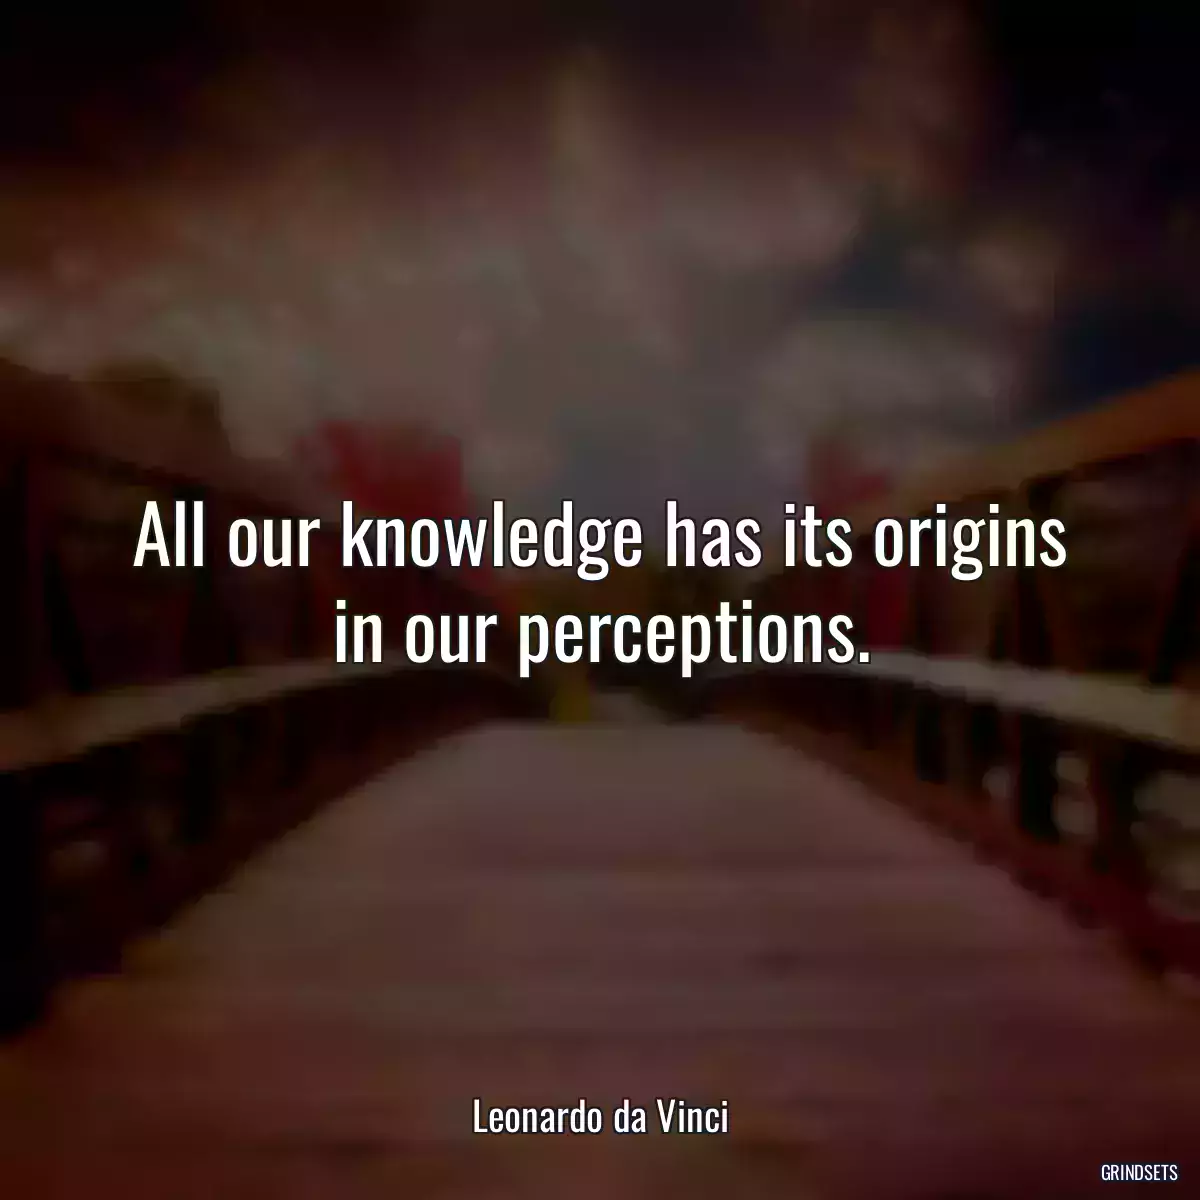 All our knowledge has its origins in our perceptions.